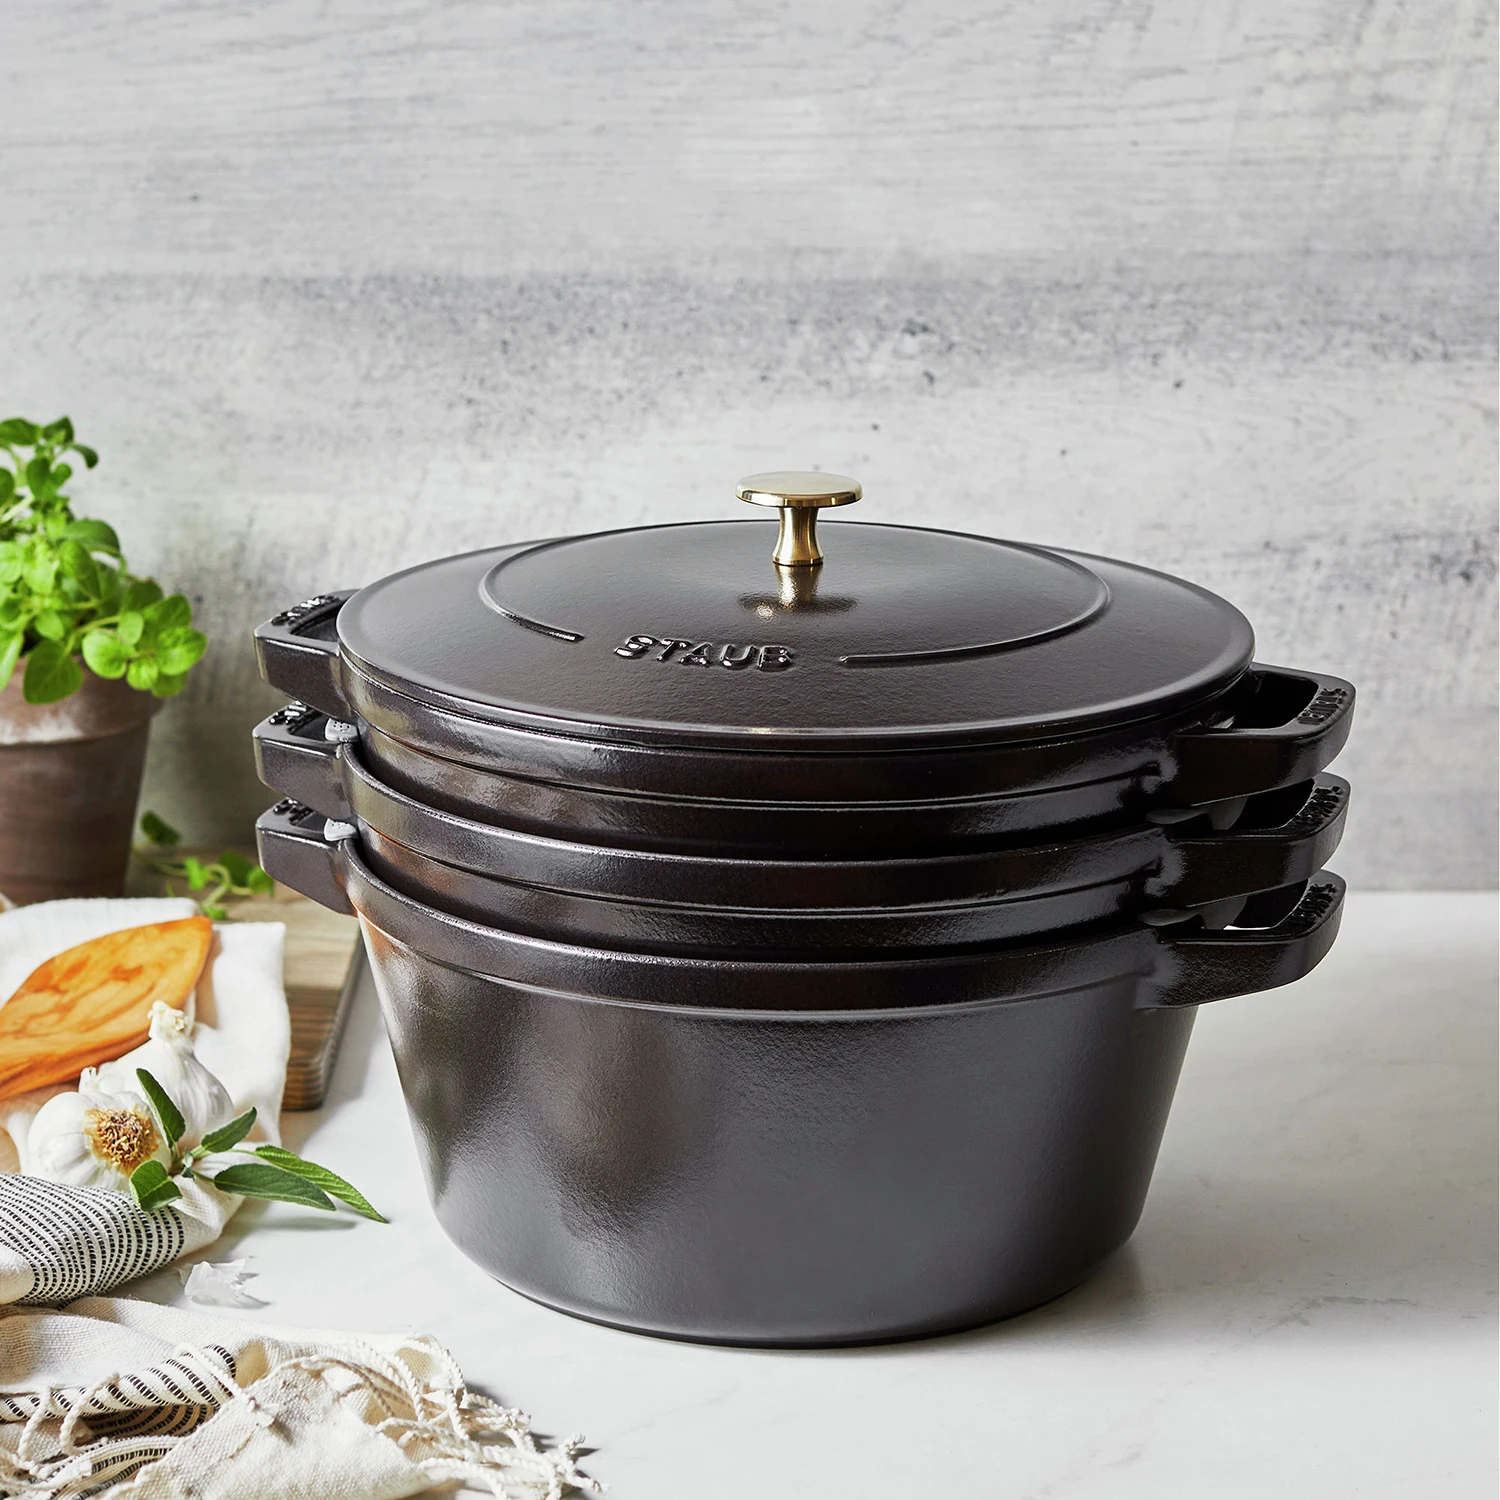 https://www.homethreads.com/files/zwilling/14552623-staub-cast-iron-set-4-pc-stackable-space-saving-cookware-set-dutch-oven-with-universal-lid-made-in-france-matte-black-15.webp